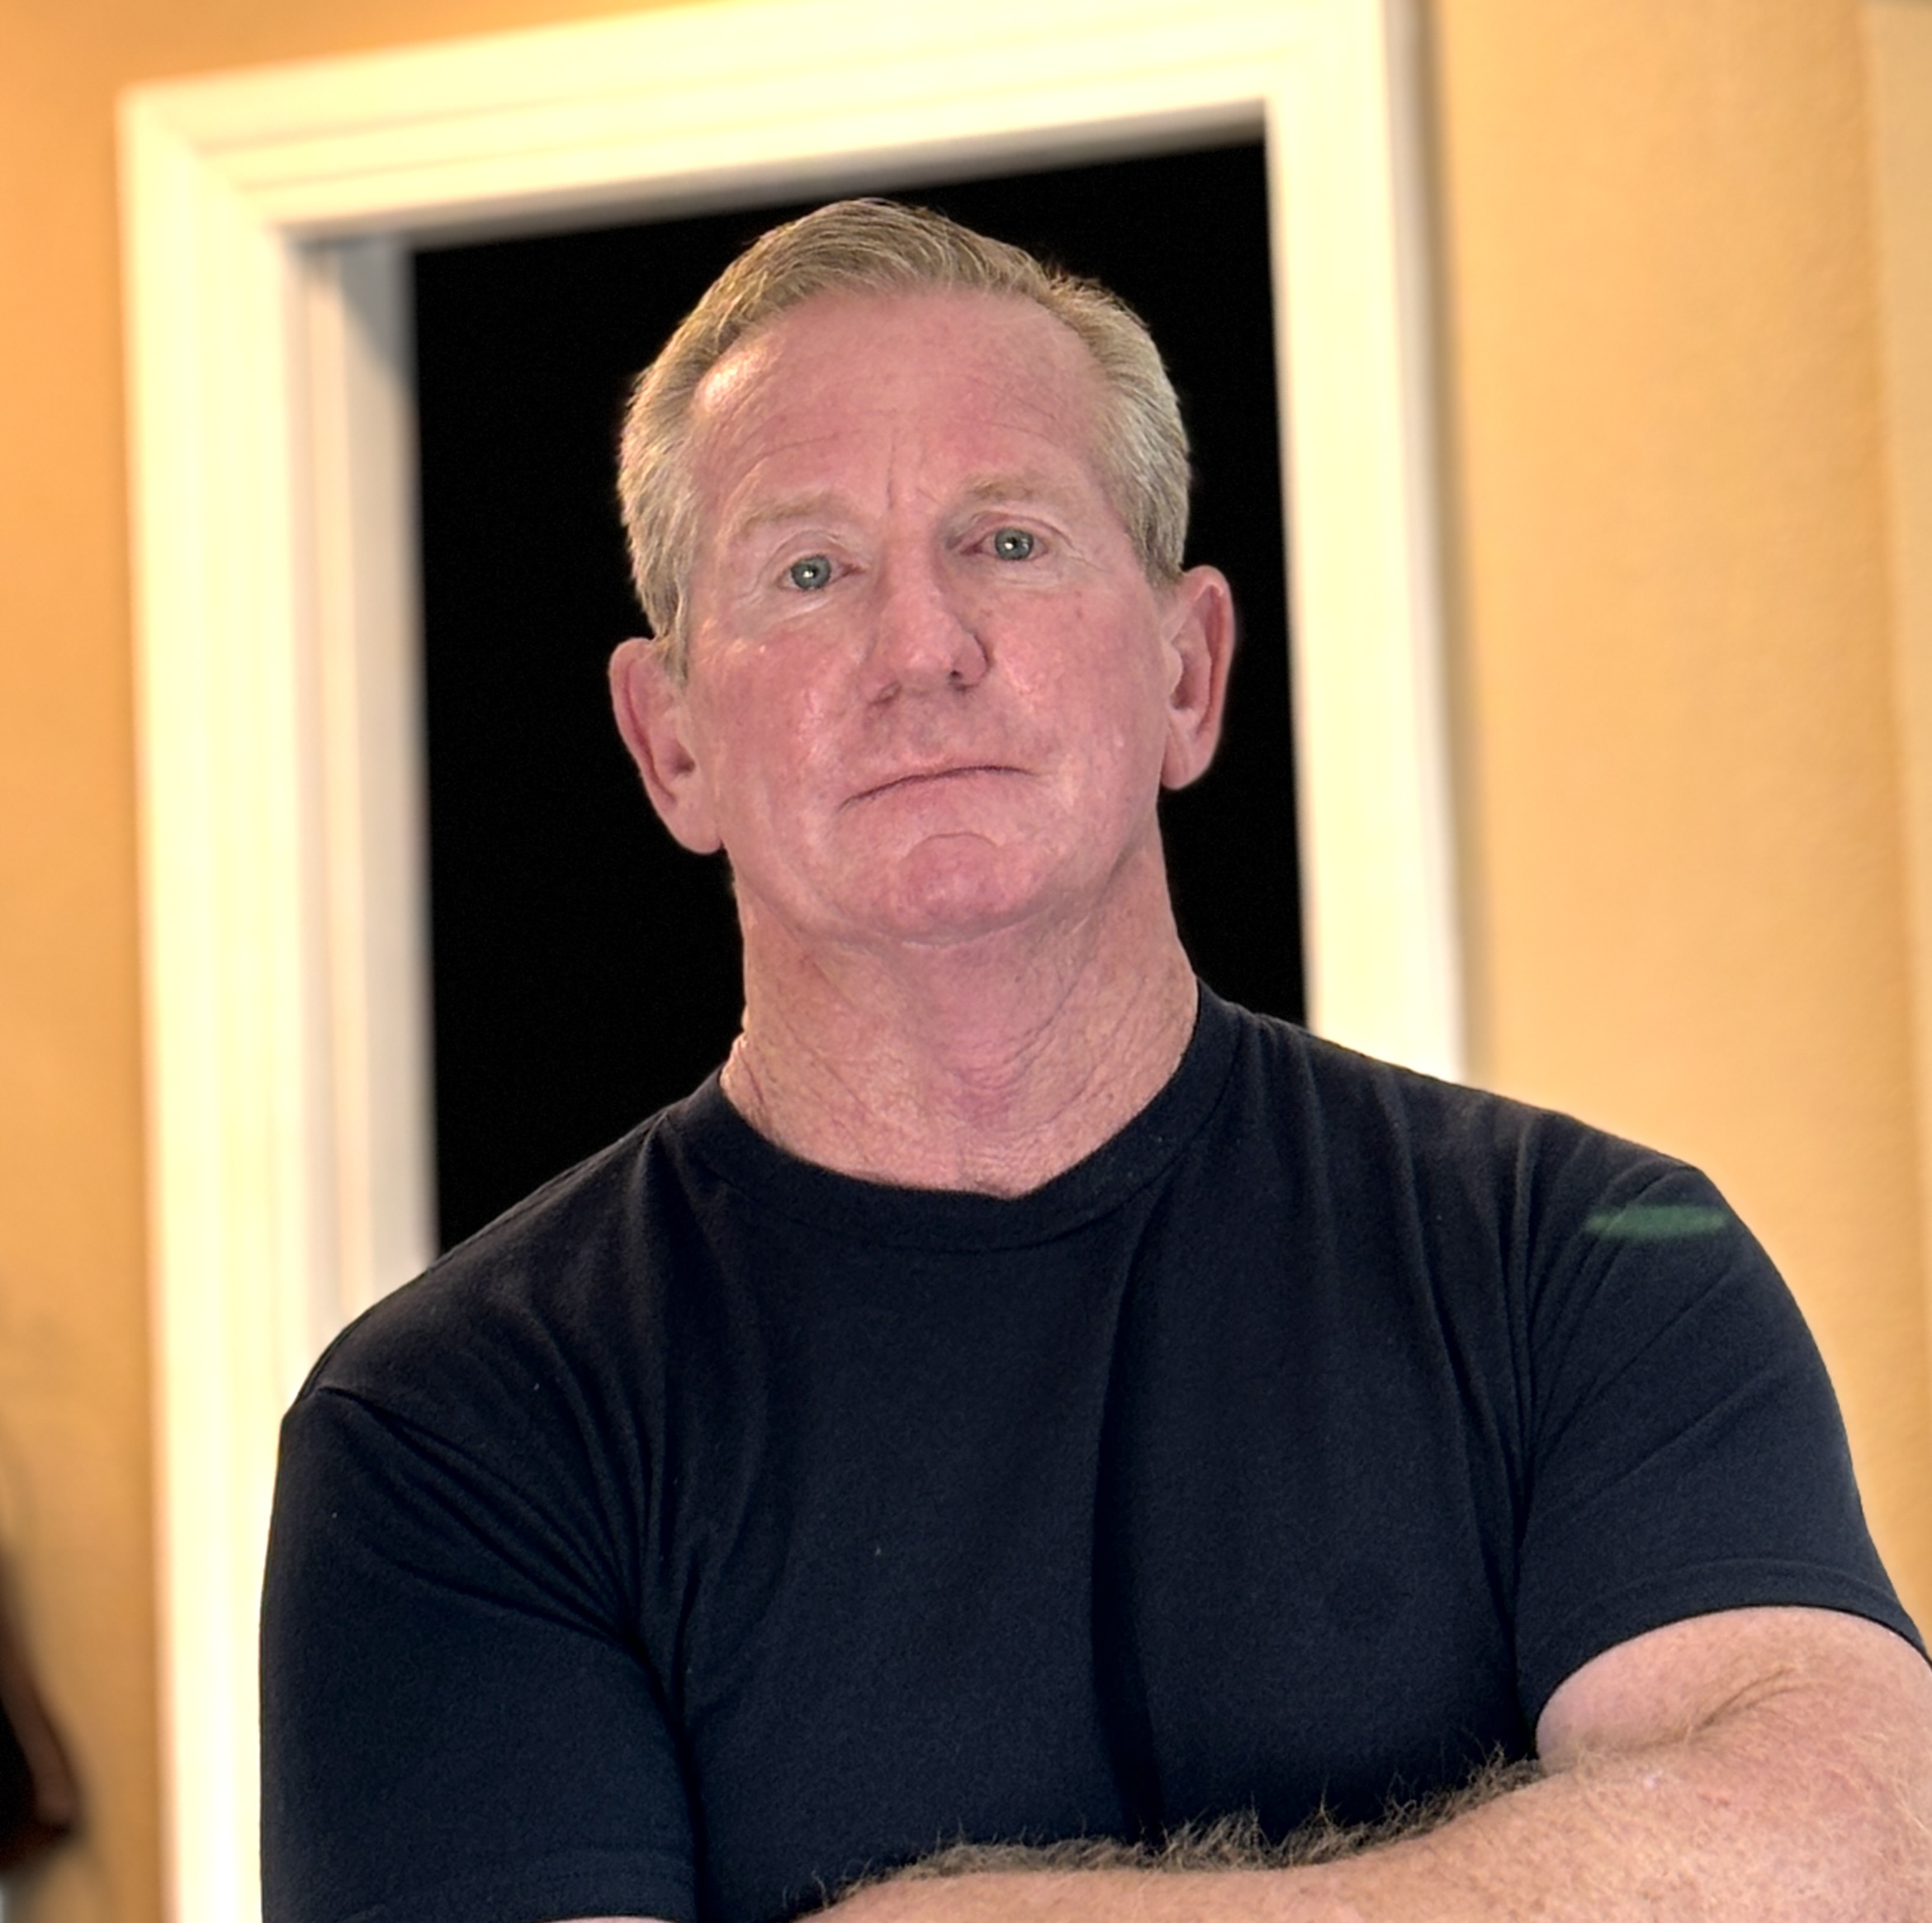 A man in a black t-shirt stands with one arm crossed in front of him and looks at the camera.